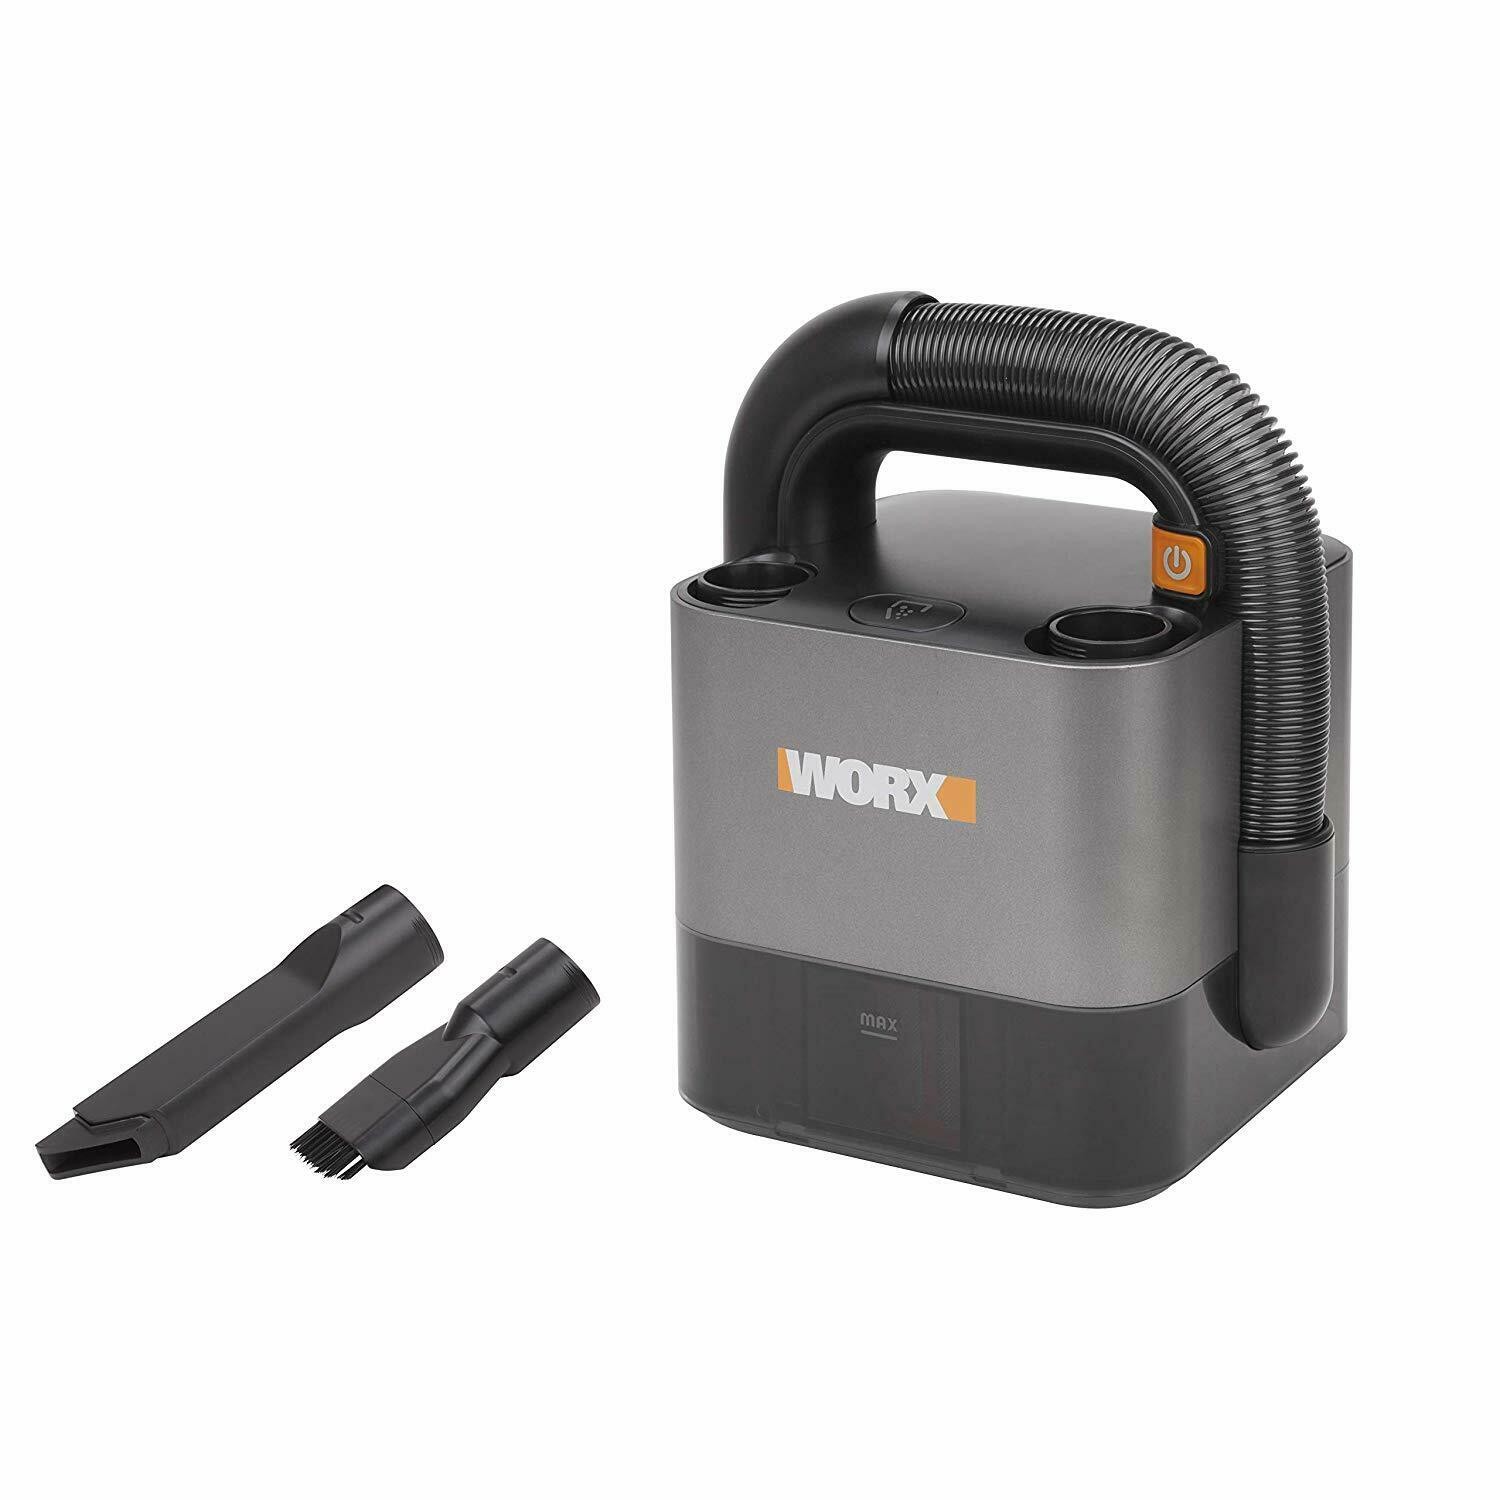 Worx Wx030l.9 20v Portable Vacuum - Tool Only (no Battery Or Charger)